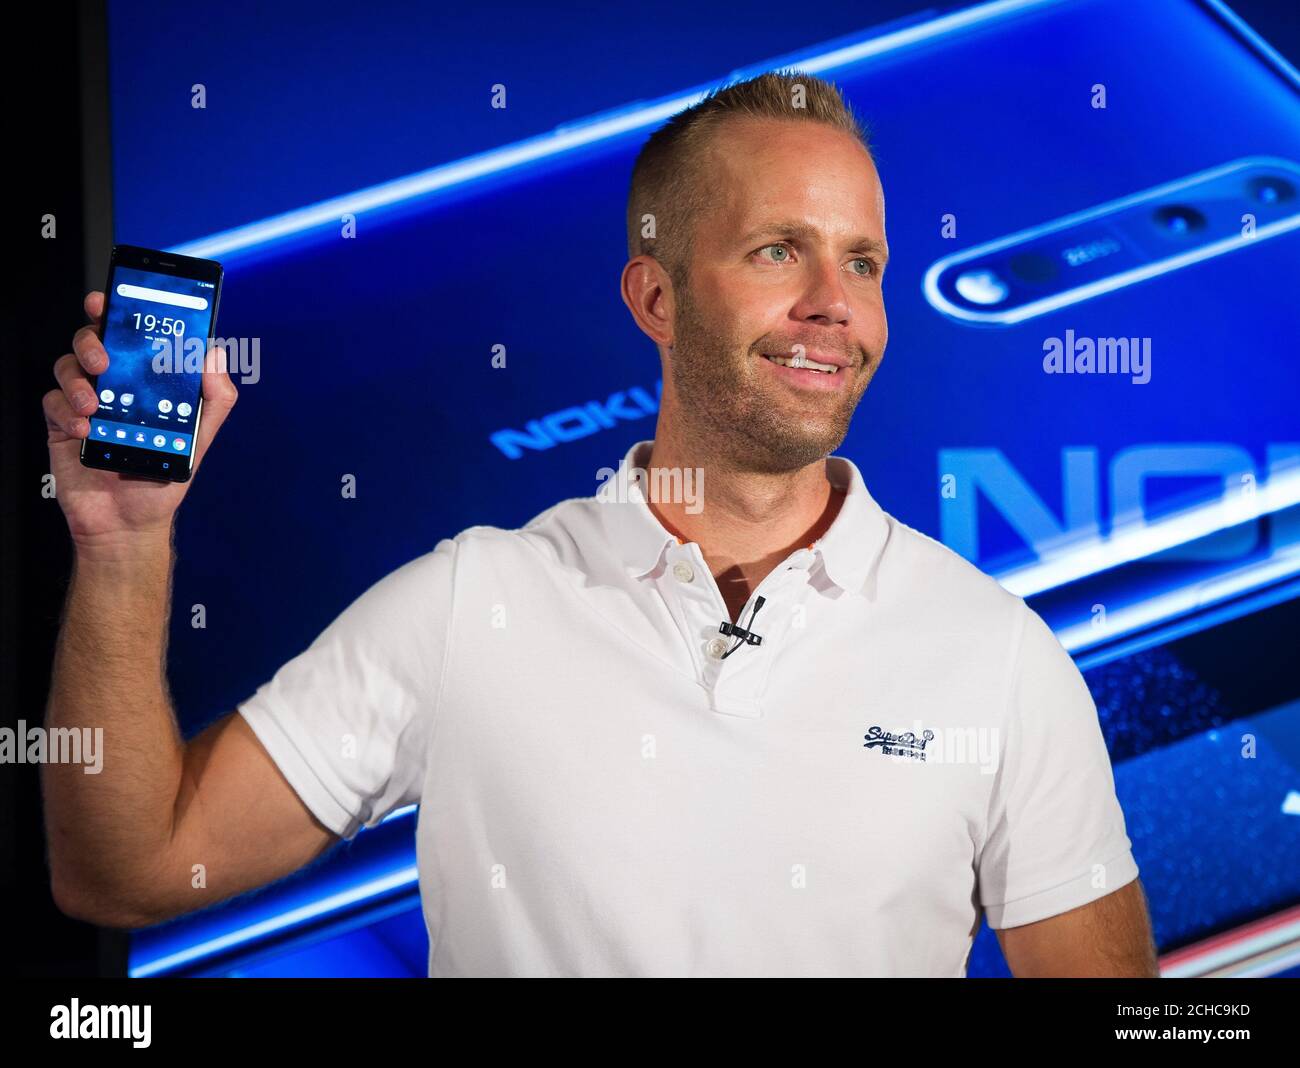 Juho Sarvikas, chief product officer for HMD Global, at the launch event for the new Nokia 8 at Tower Bridge in London. Stock Photo